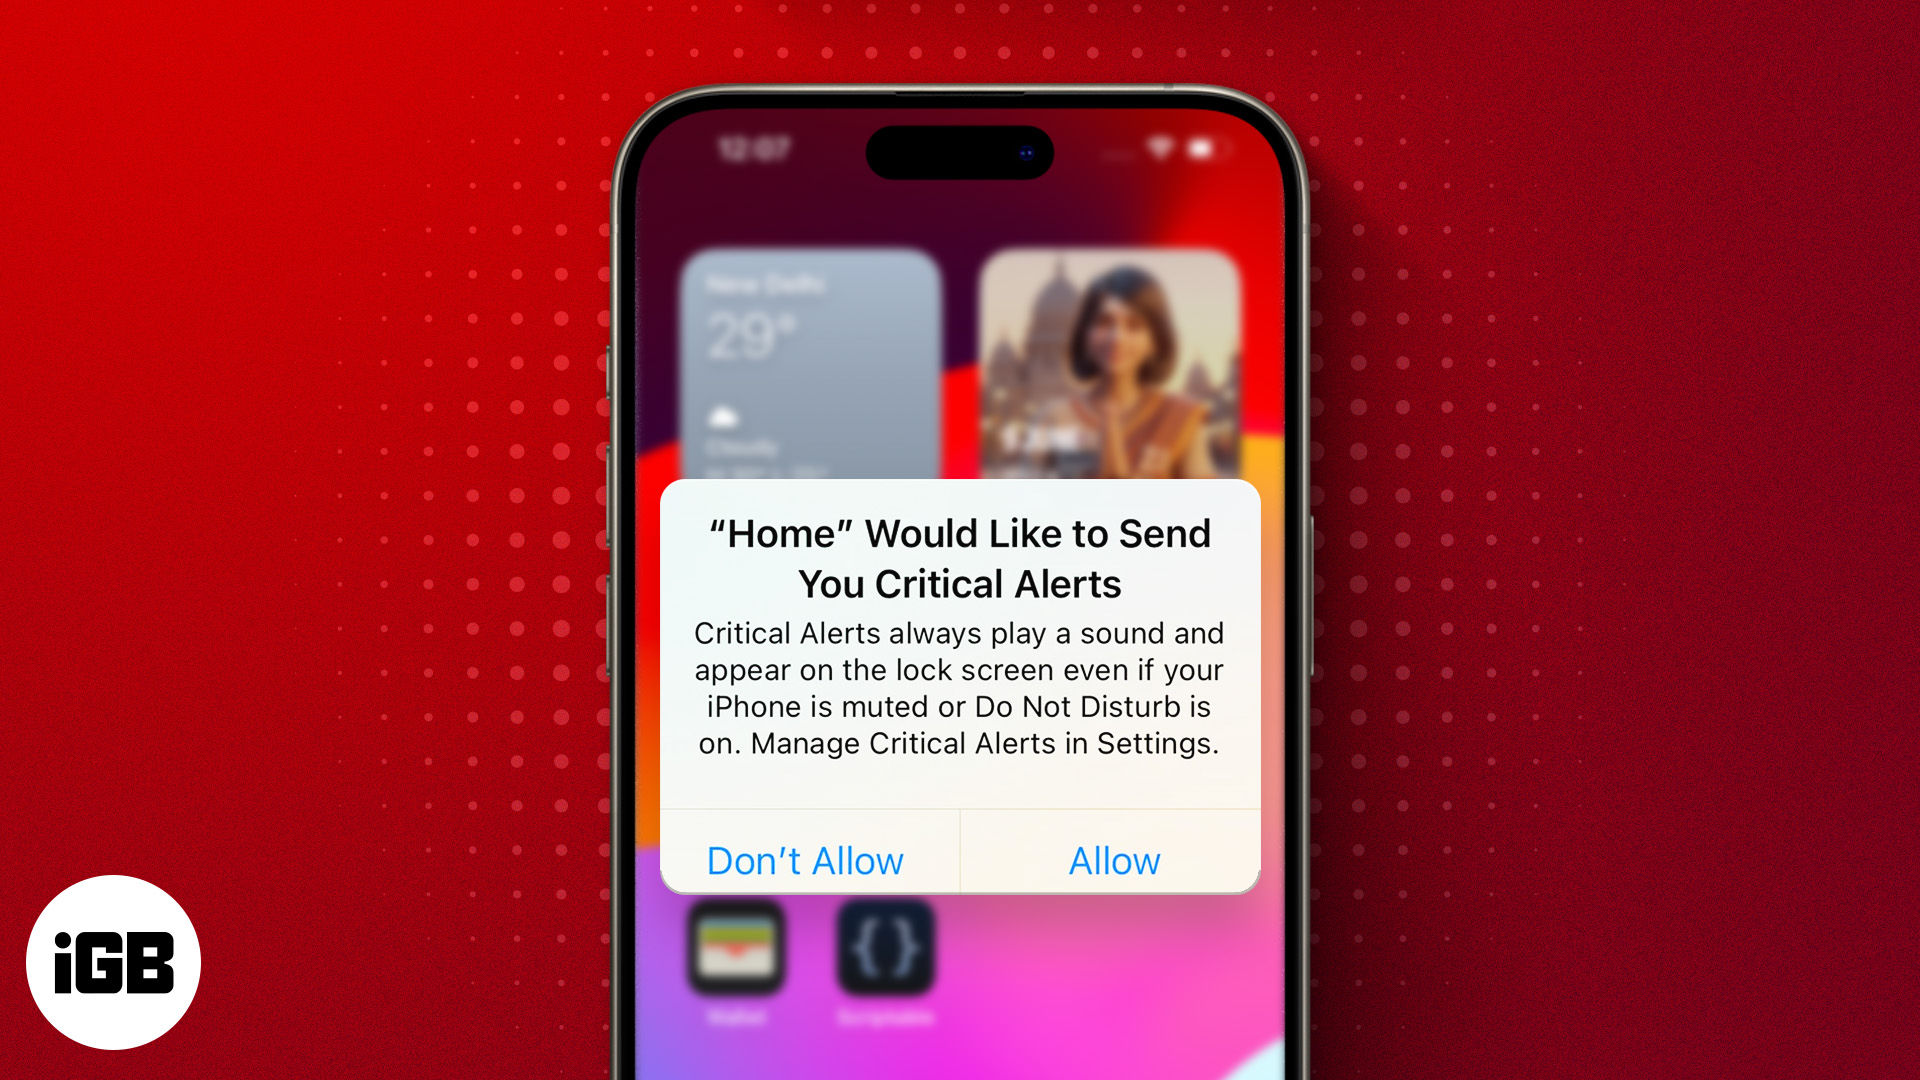 How to fix an iPhone stuck on “Home Would Like to Send You Critical Alerts”